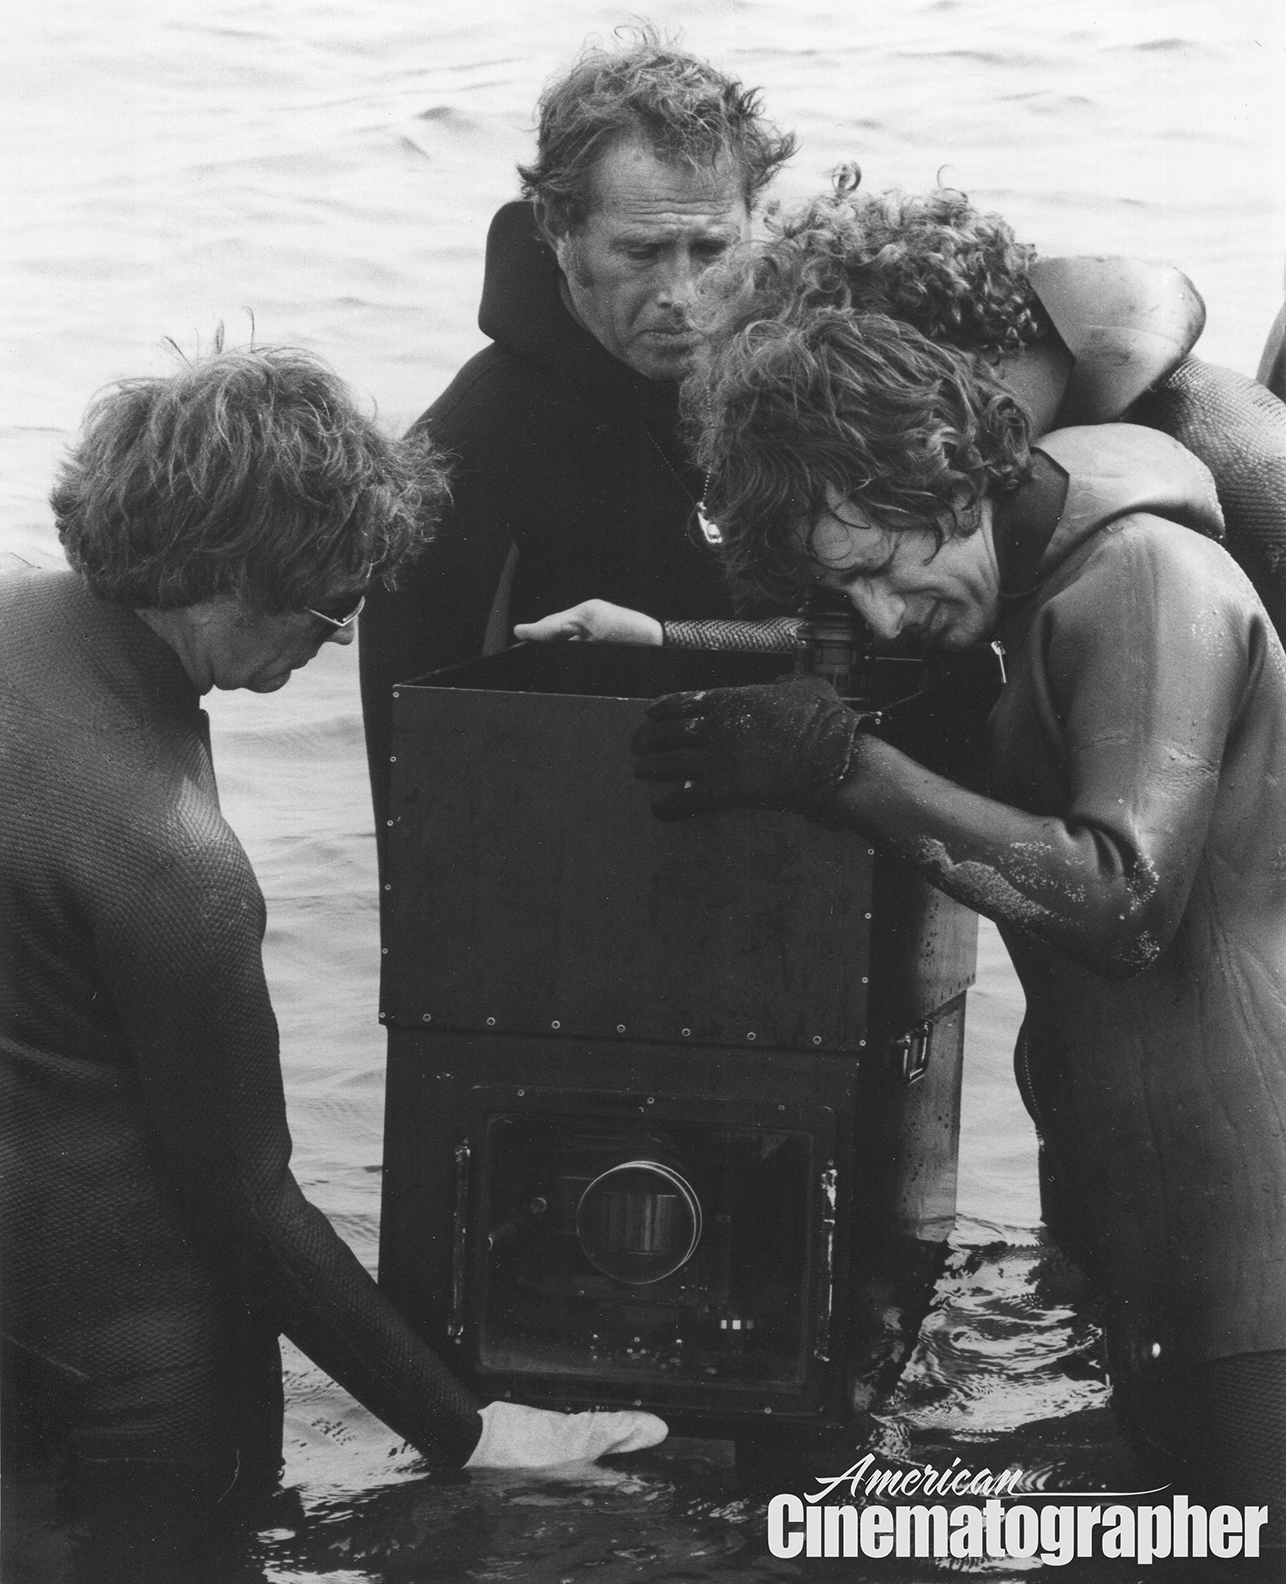 Spielberg checks the frame while shooting at surface level.